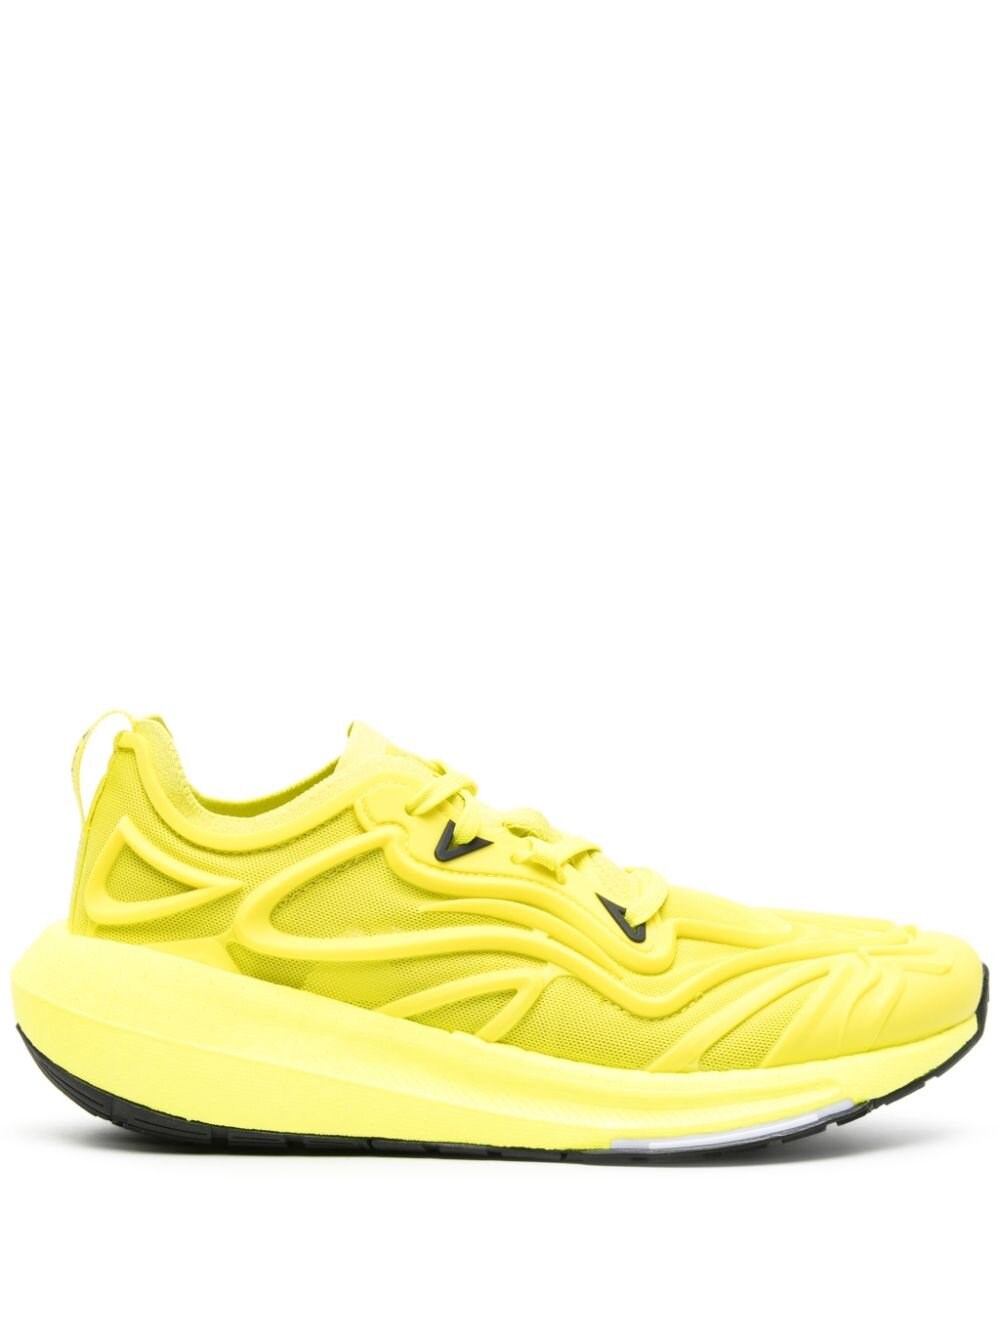 Adidas By Stella Mccartney Ultraboost Speed Running Trainers In Yellow